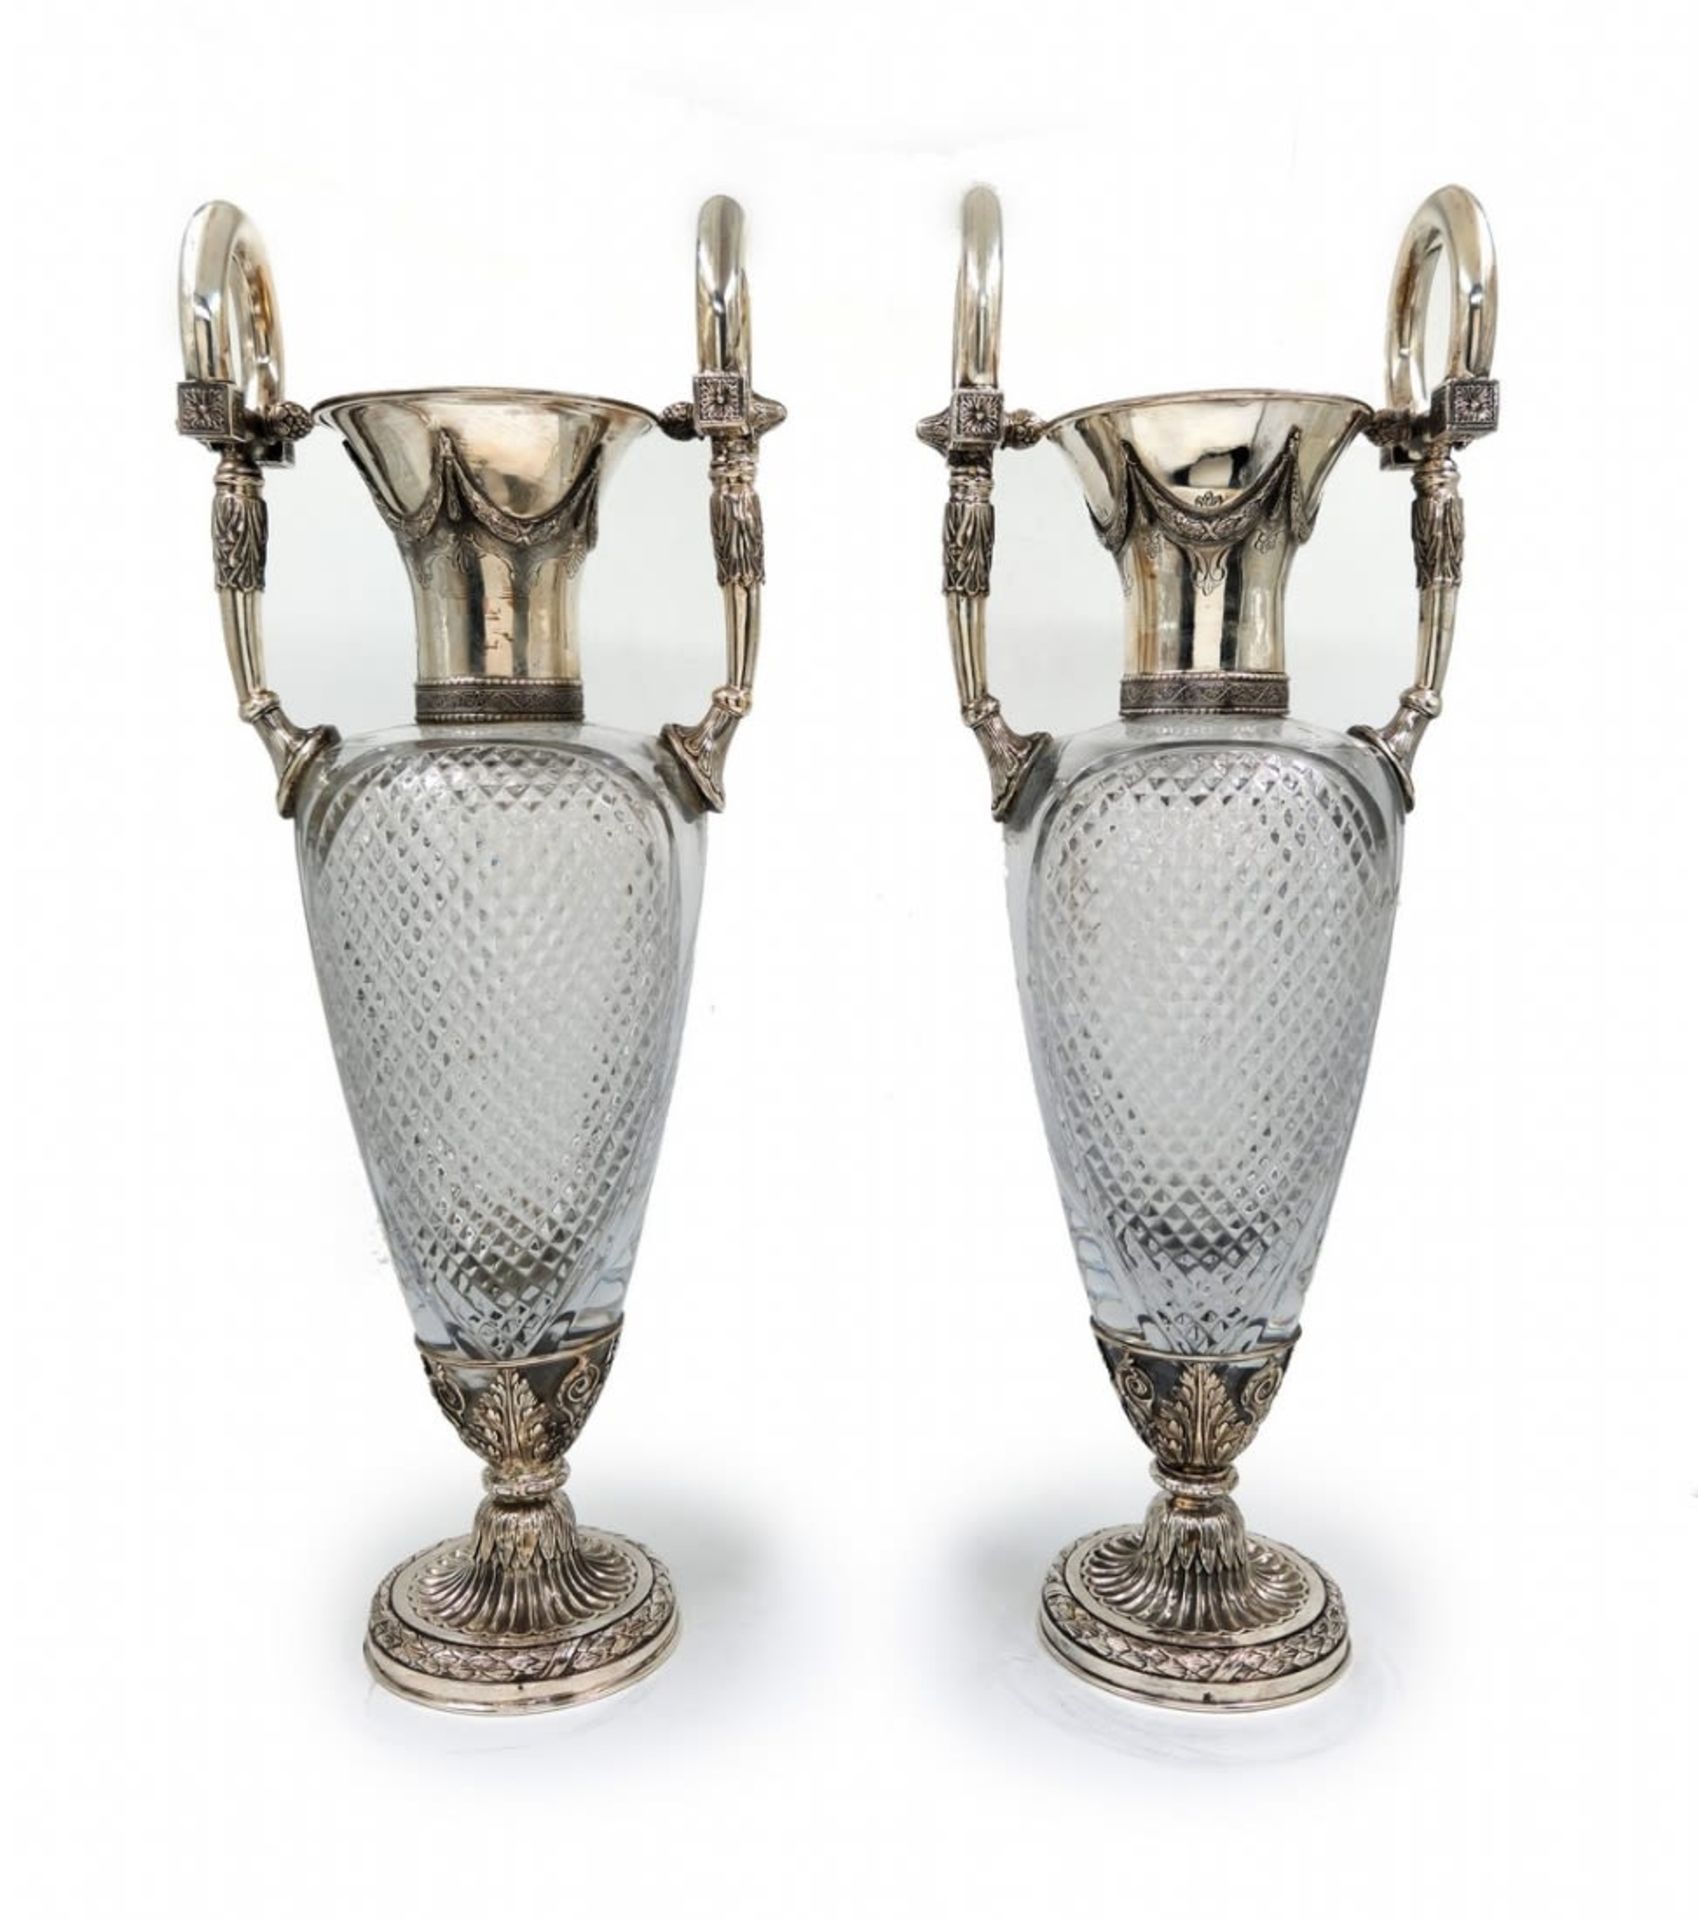 A pair of high and luxurious vases, made of polished crystal and 'sterling' silver, signed: 'A.N